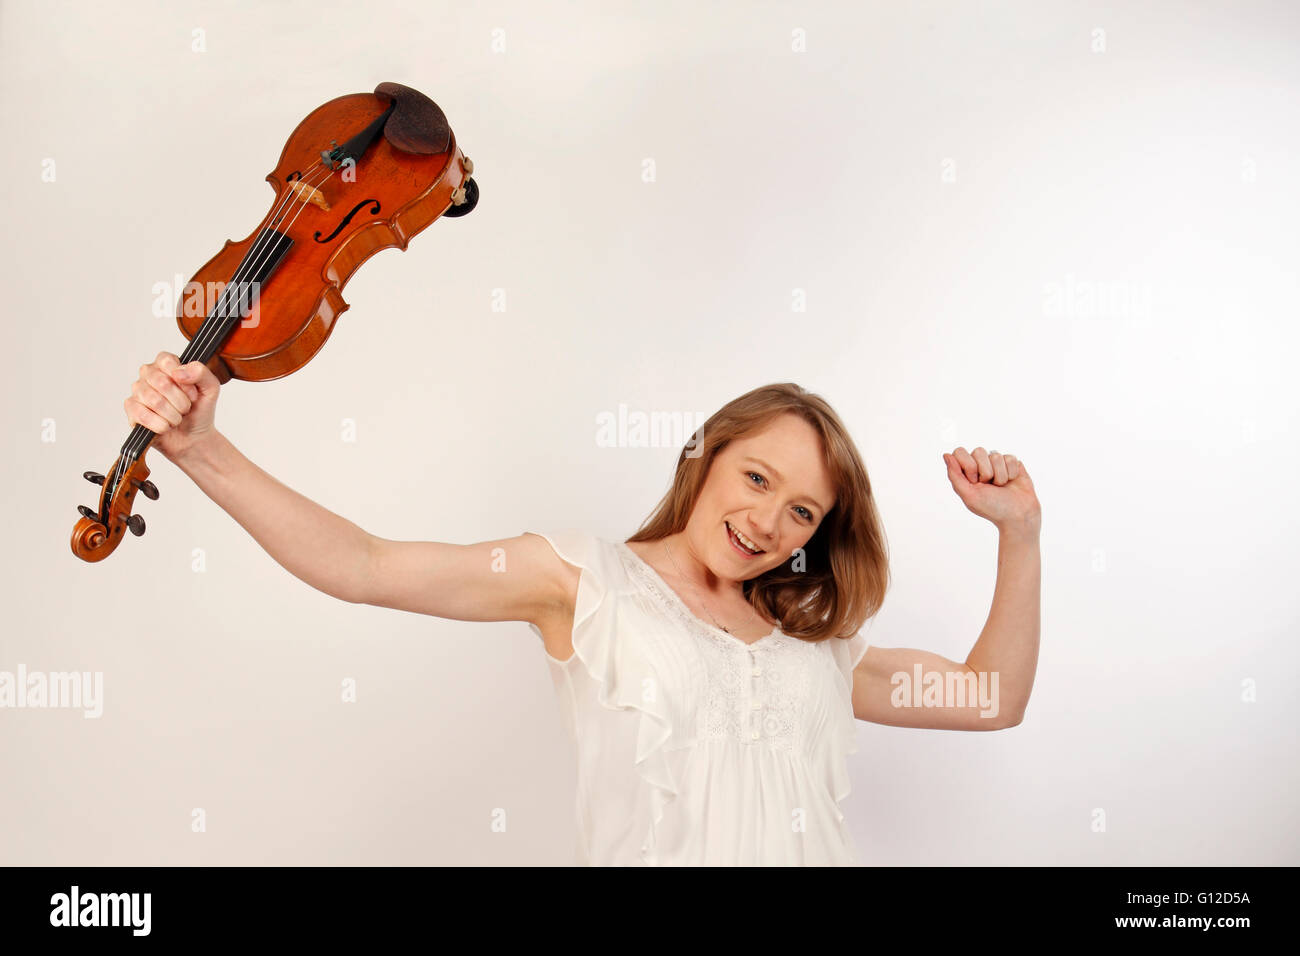 young woman cheering and holding a violin Stock Photo